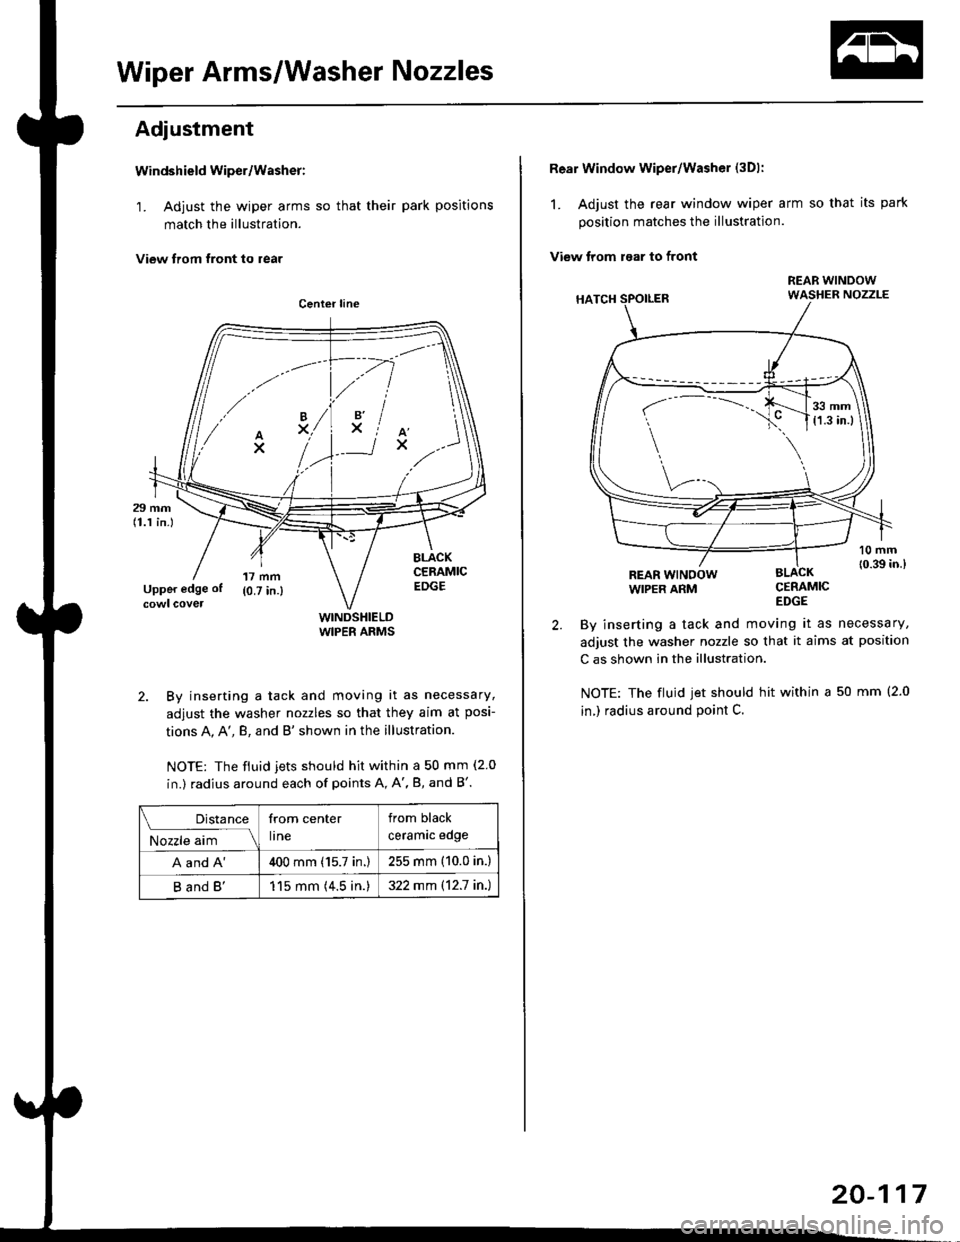 HONDA CIVIC 1998 6.G Workshop Manual Wiper Arms/Washer Nozzles
Adjustment
Windshield wiper/Washer:
1. Adjust the wiper arms so that their park positions
match the illustration.
View trom tront to rear
WINDSHIELDWIPER ARMS
2. By inserting